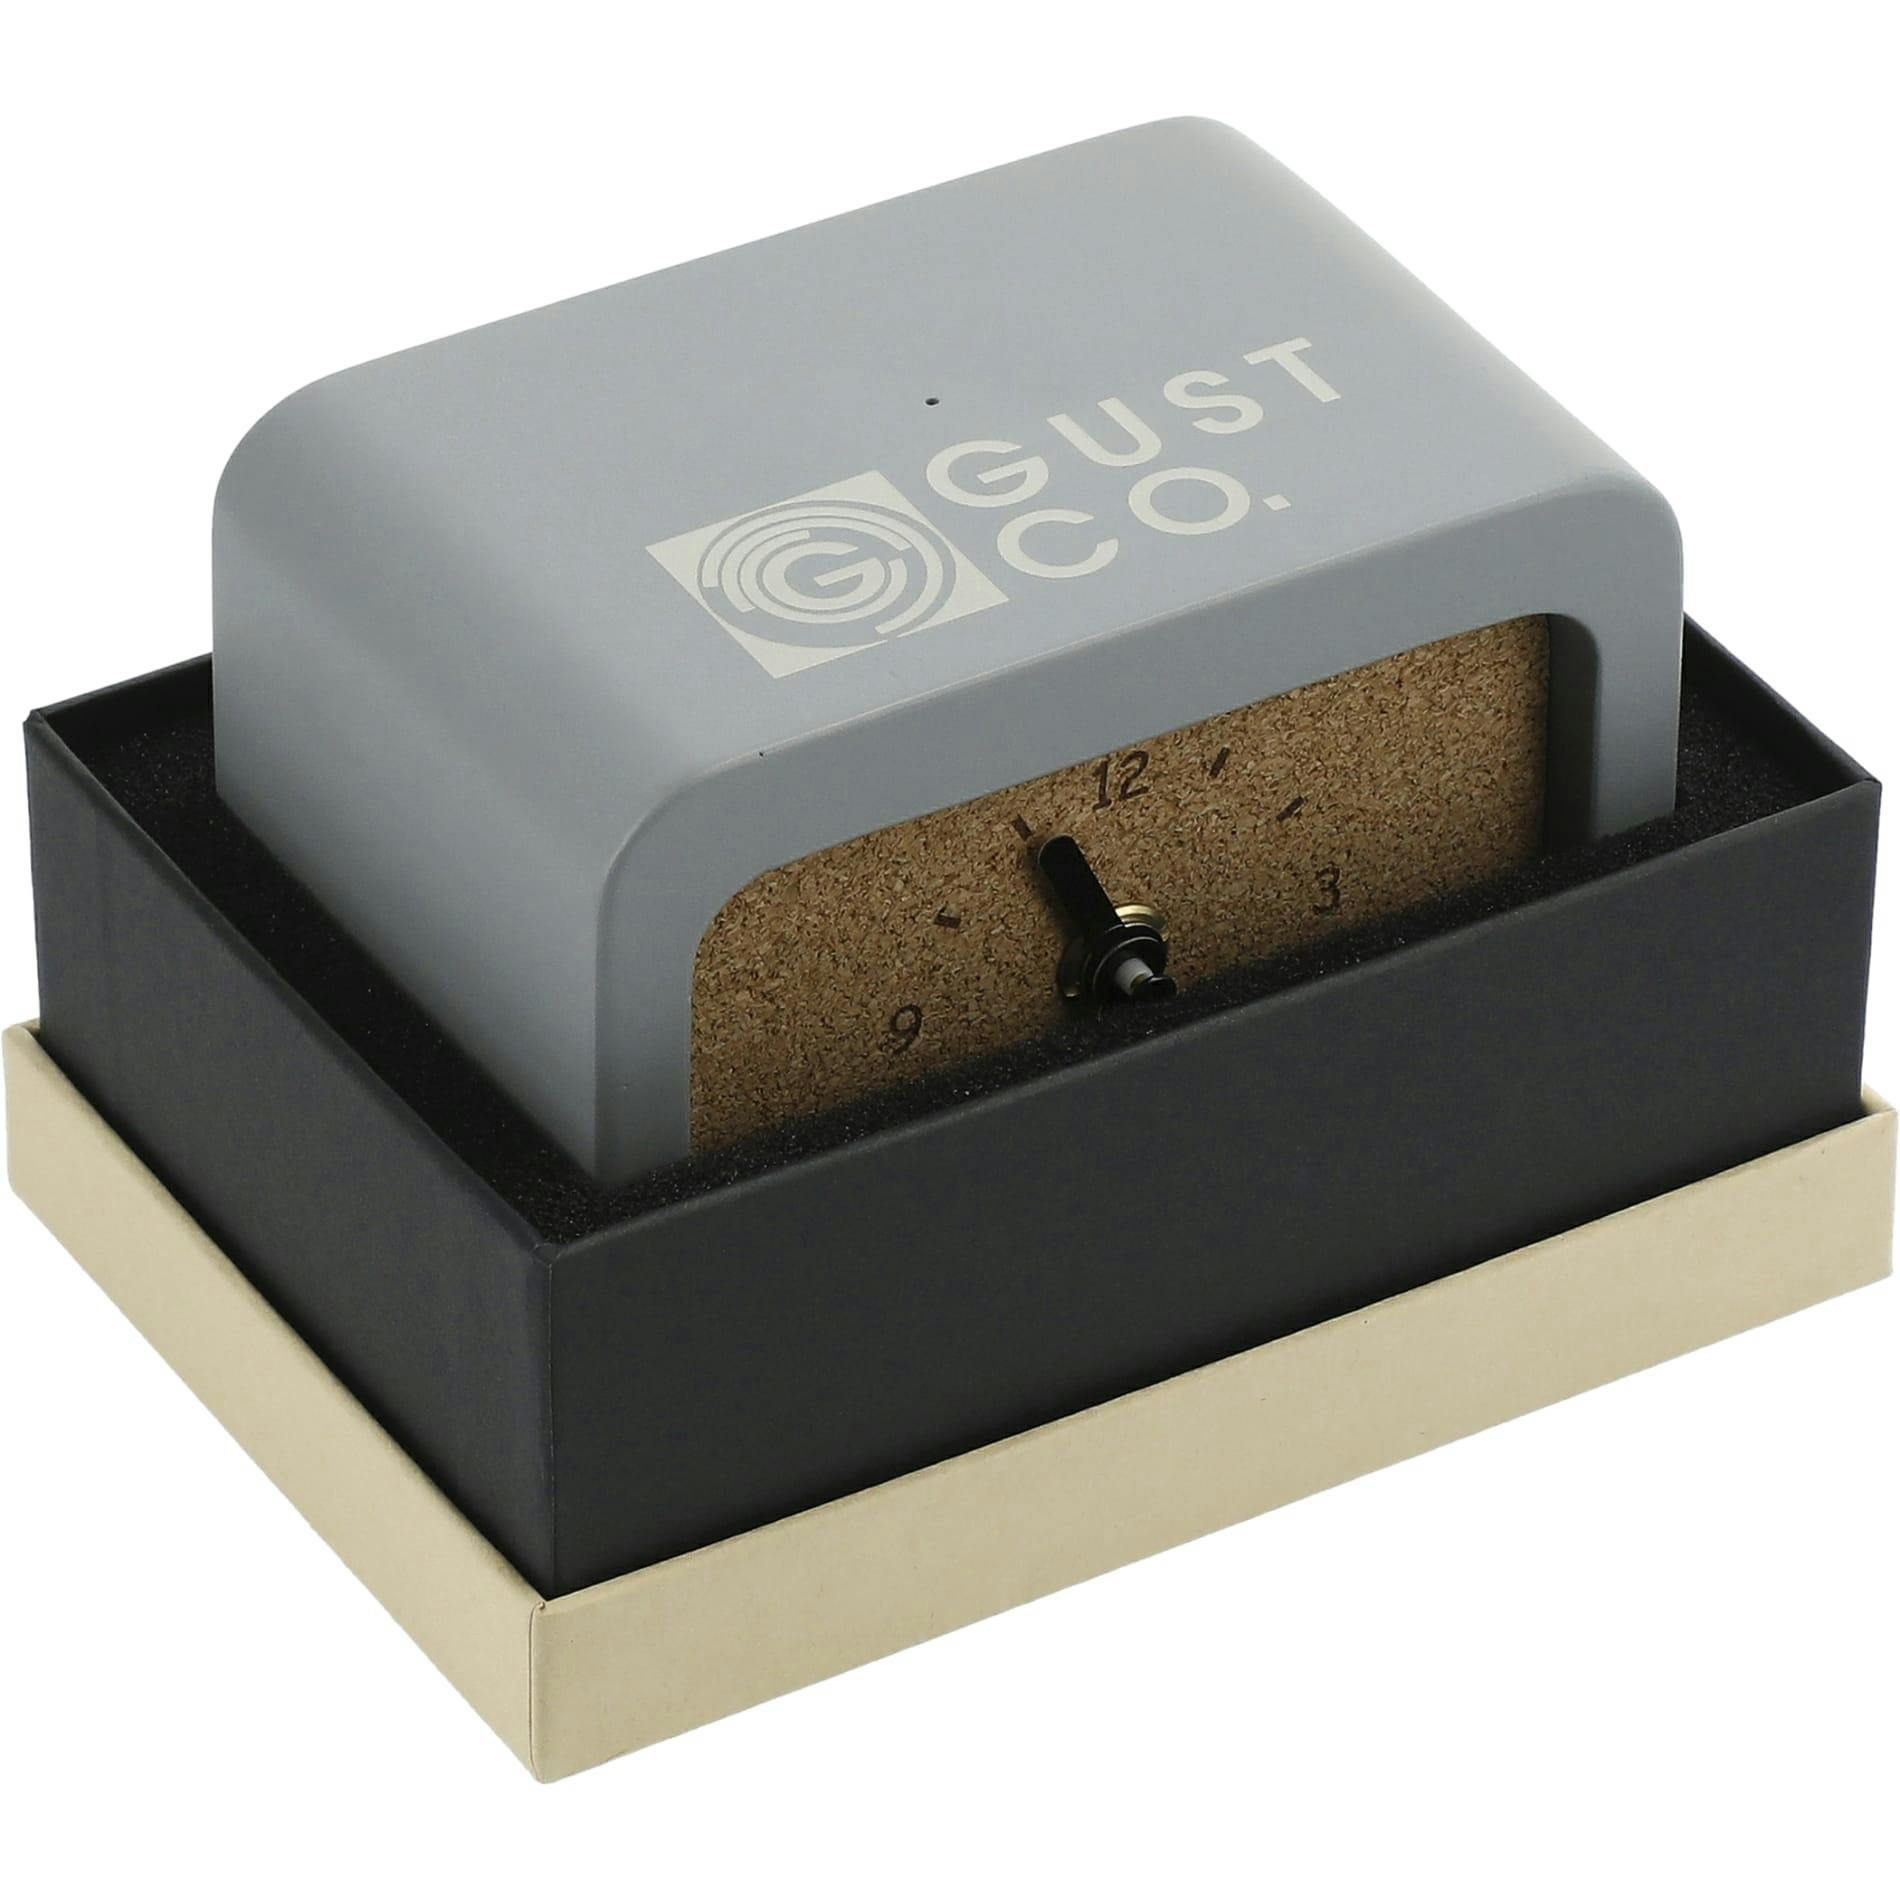 Set in Stone Wireless Charging Desk Clock - additional Image 2